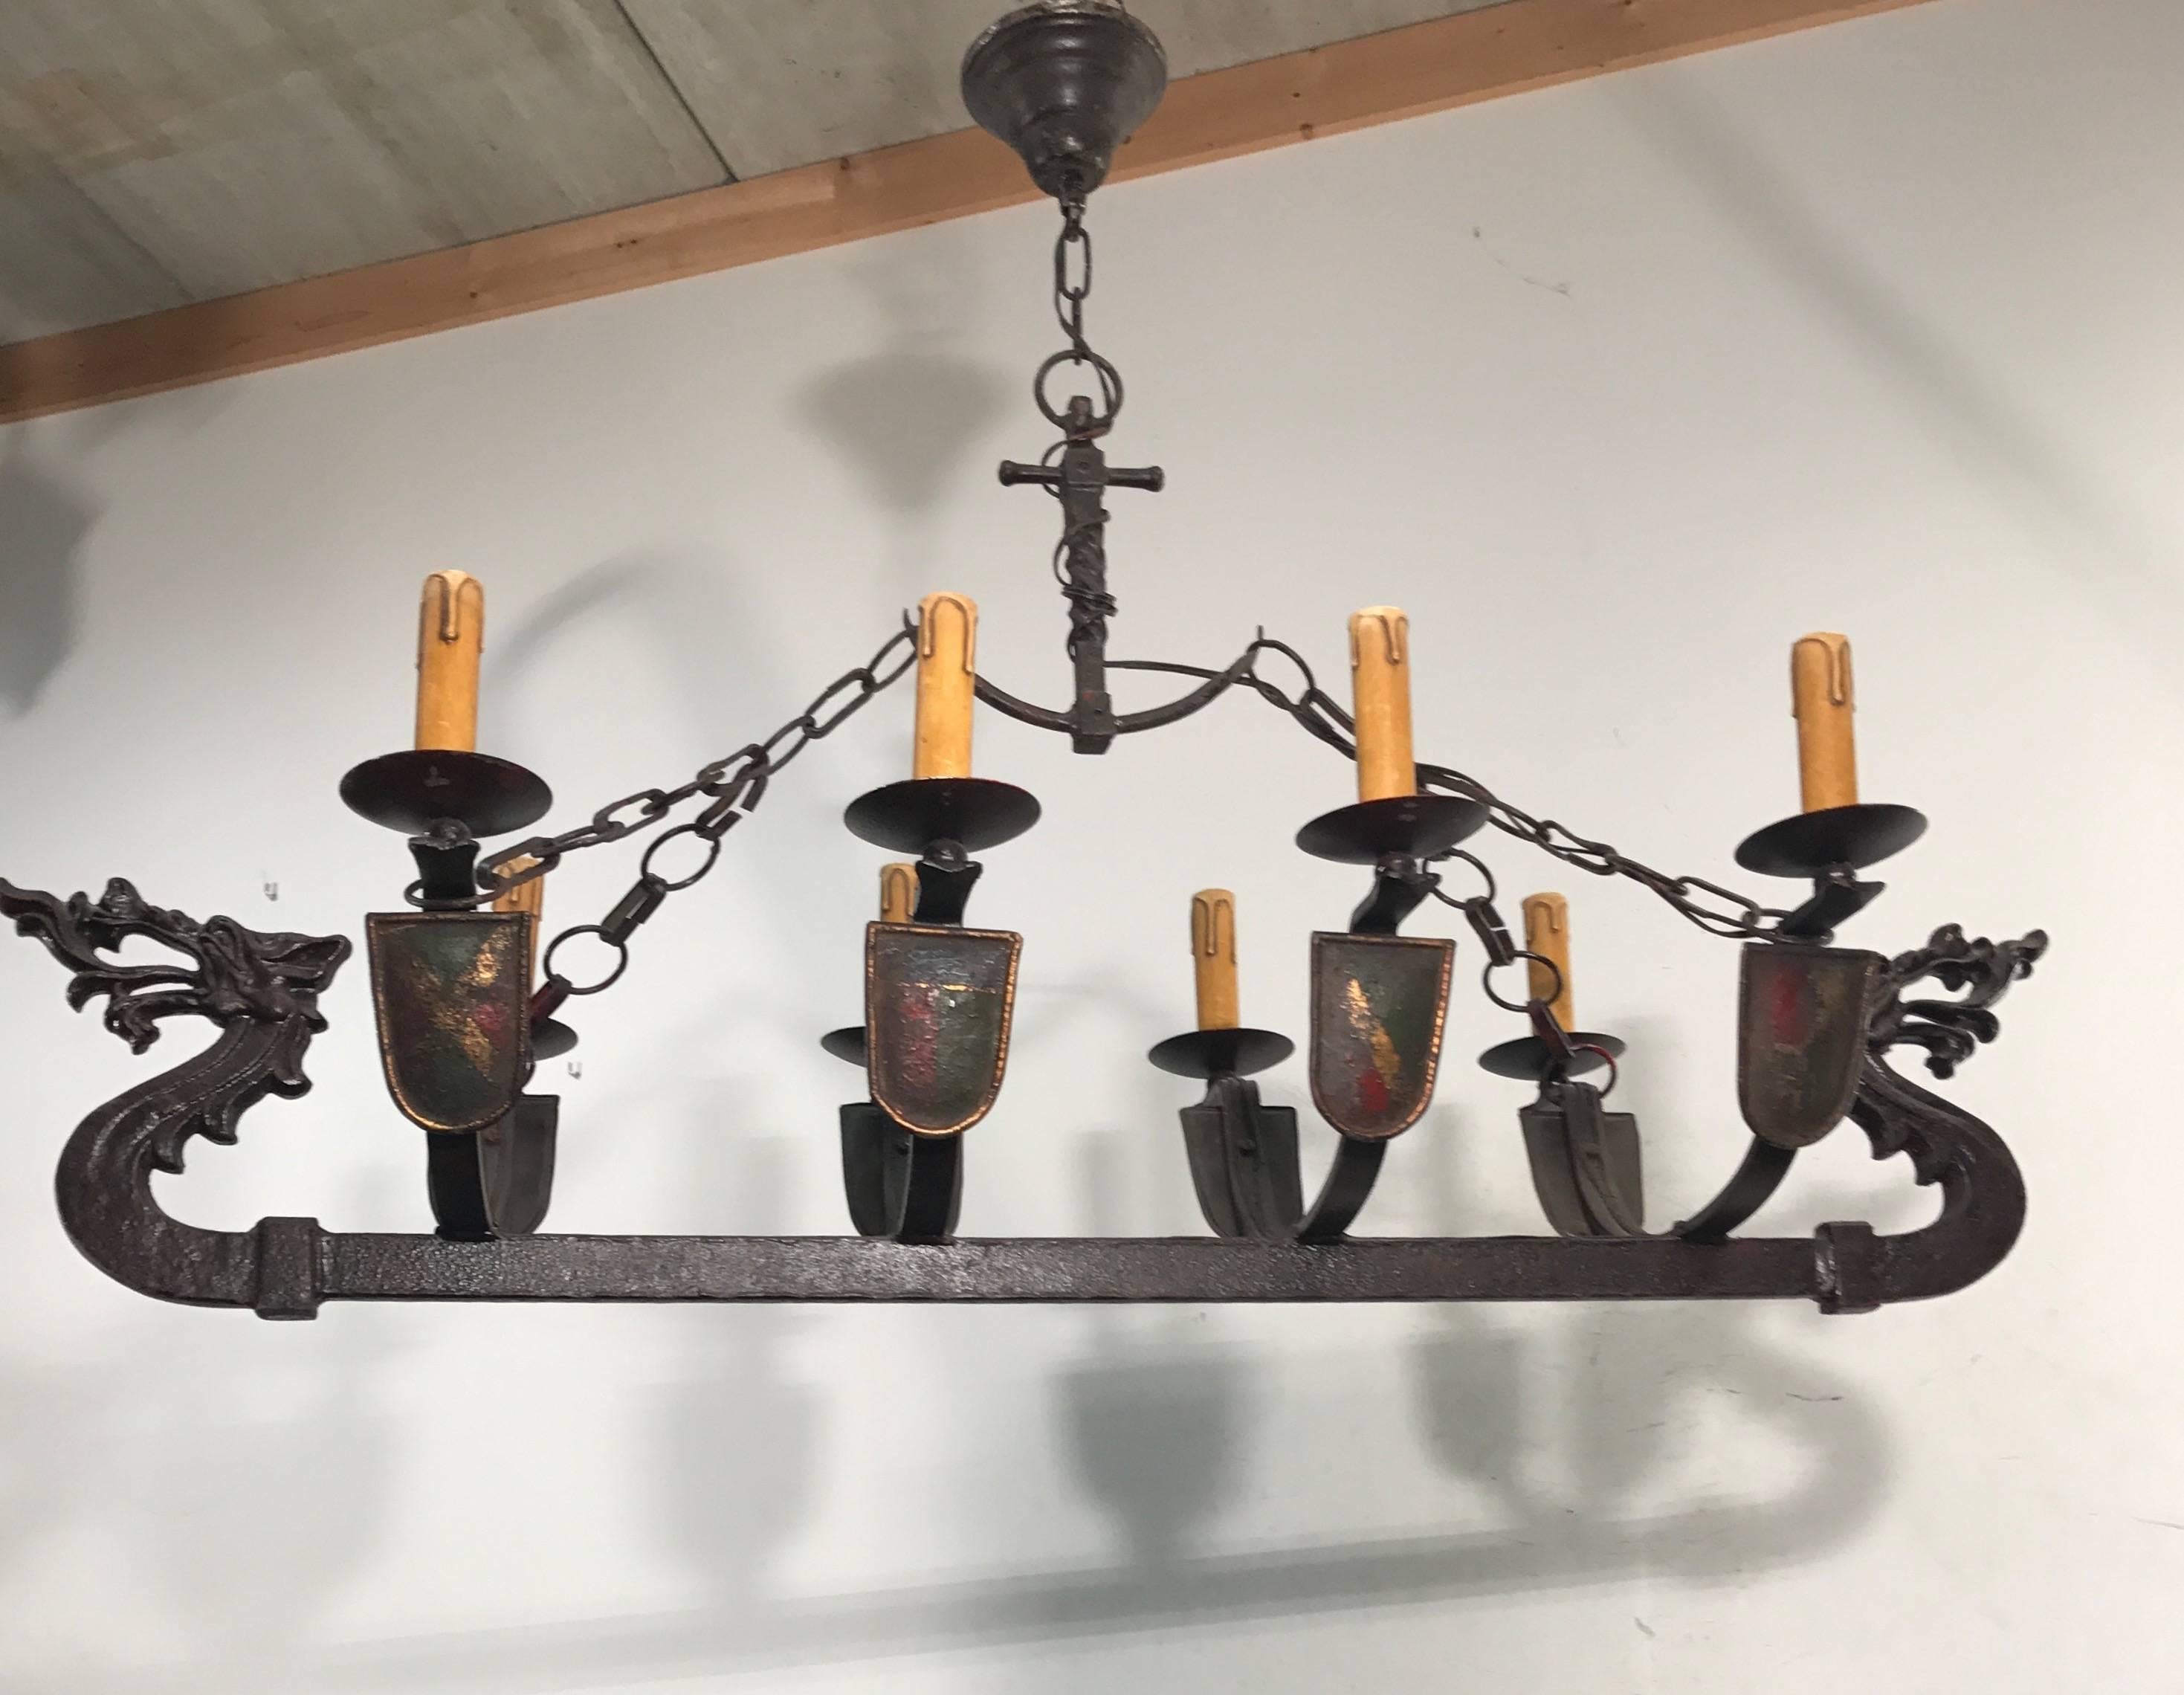 Large / Horizontal great quality wrought iron light fixture.

If you are looking for an impressive and one of a kind chandelier or if you are looking to decorate a room or business with a Viking theme then this hand-crafted work of lighting art